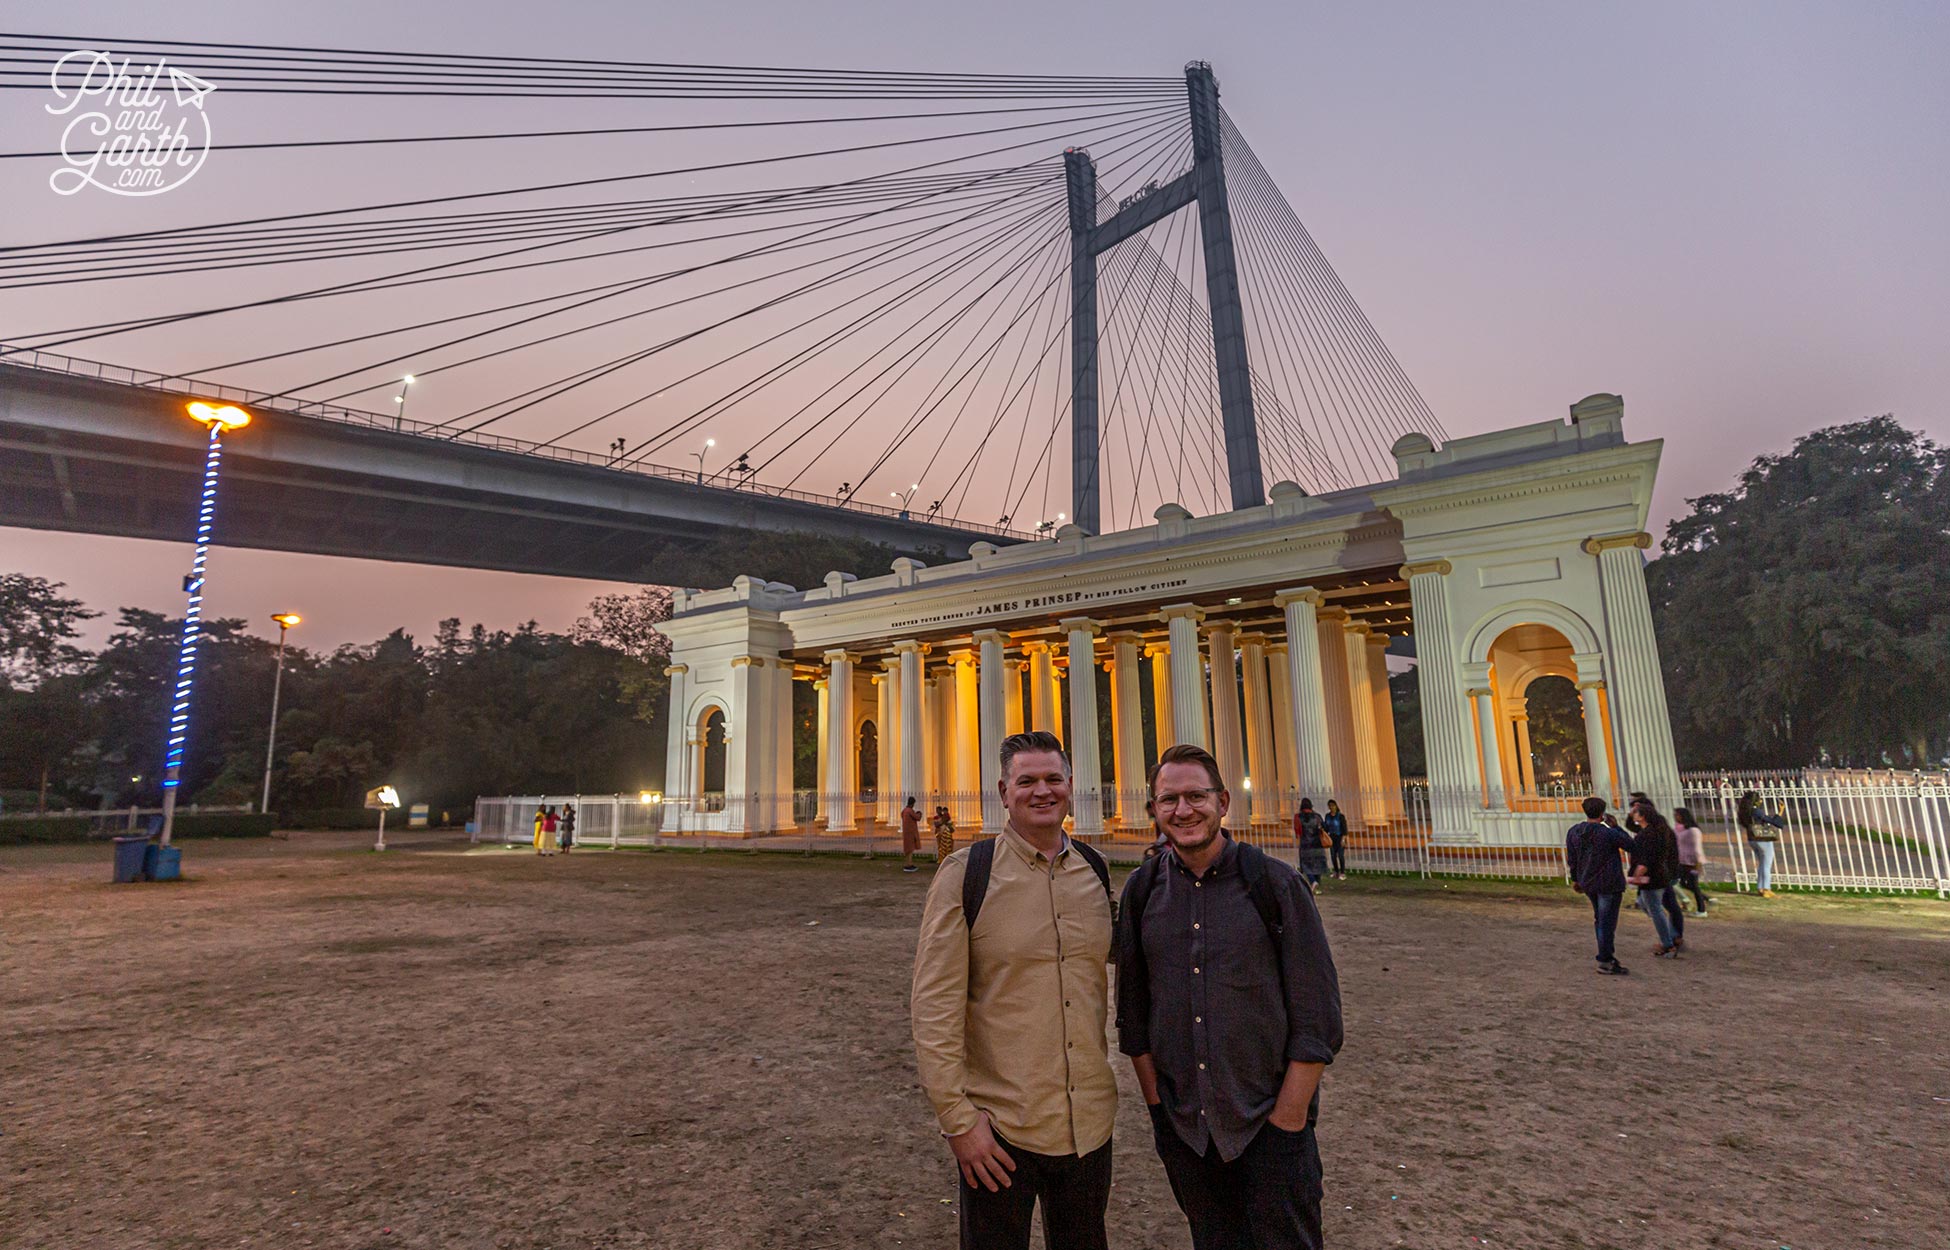 Phil and Garth next to the Vidyasagar Setu also known as the new or 2nd Hooghly Bridge